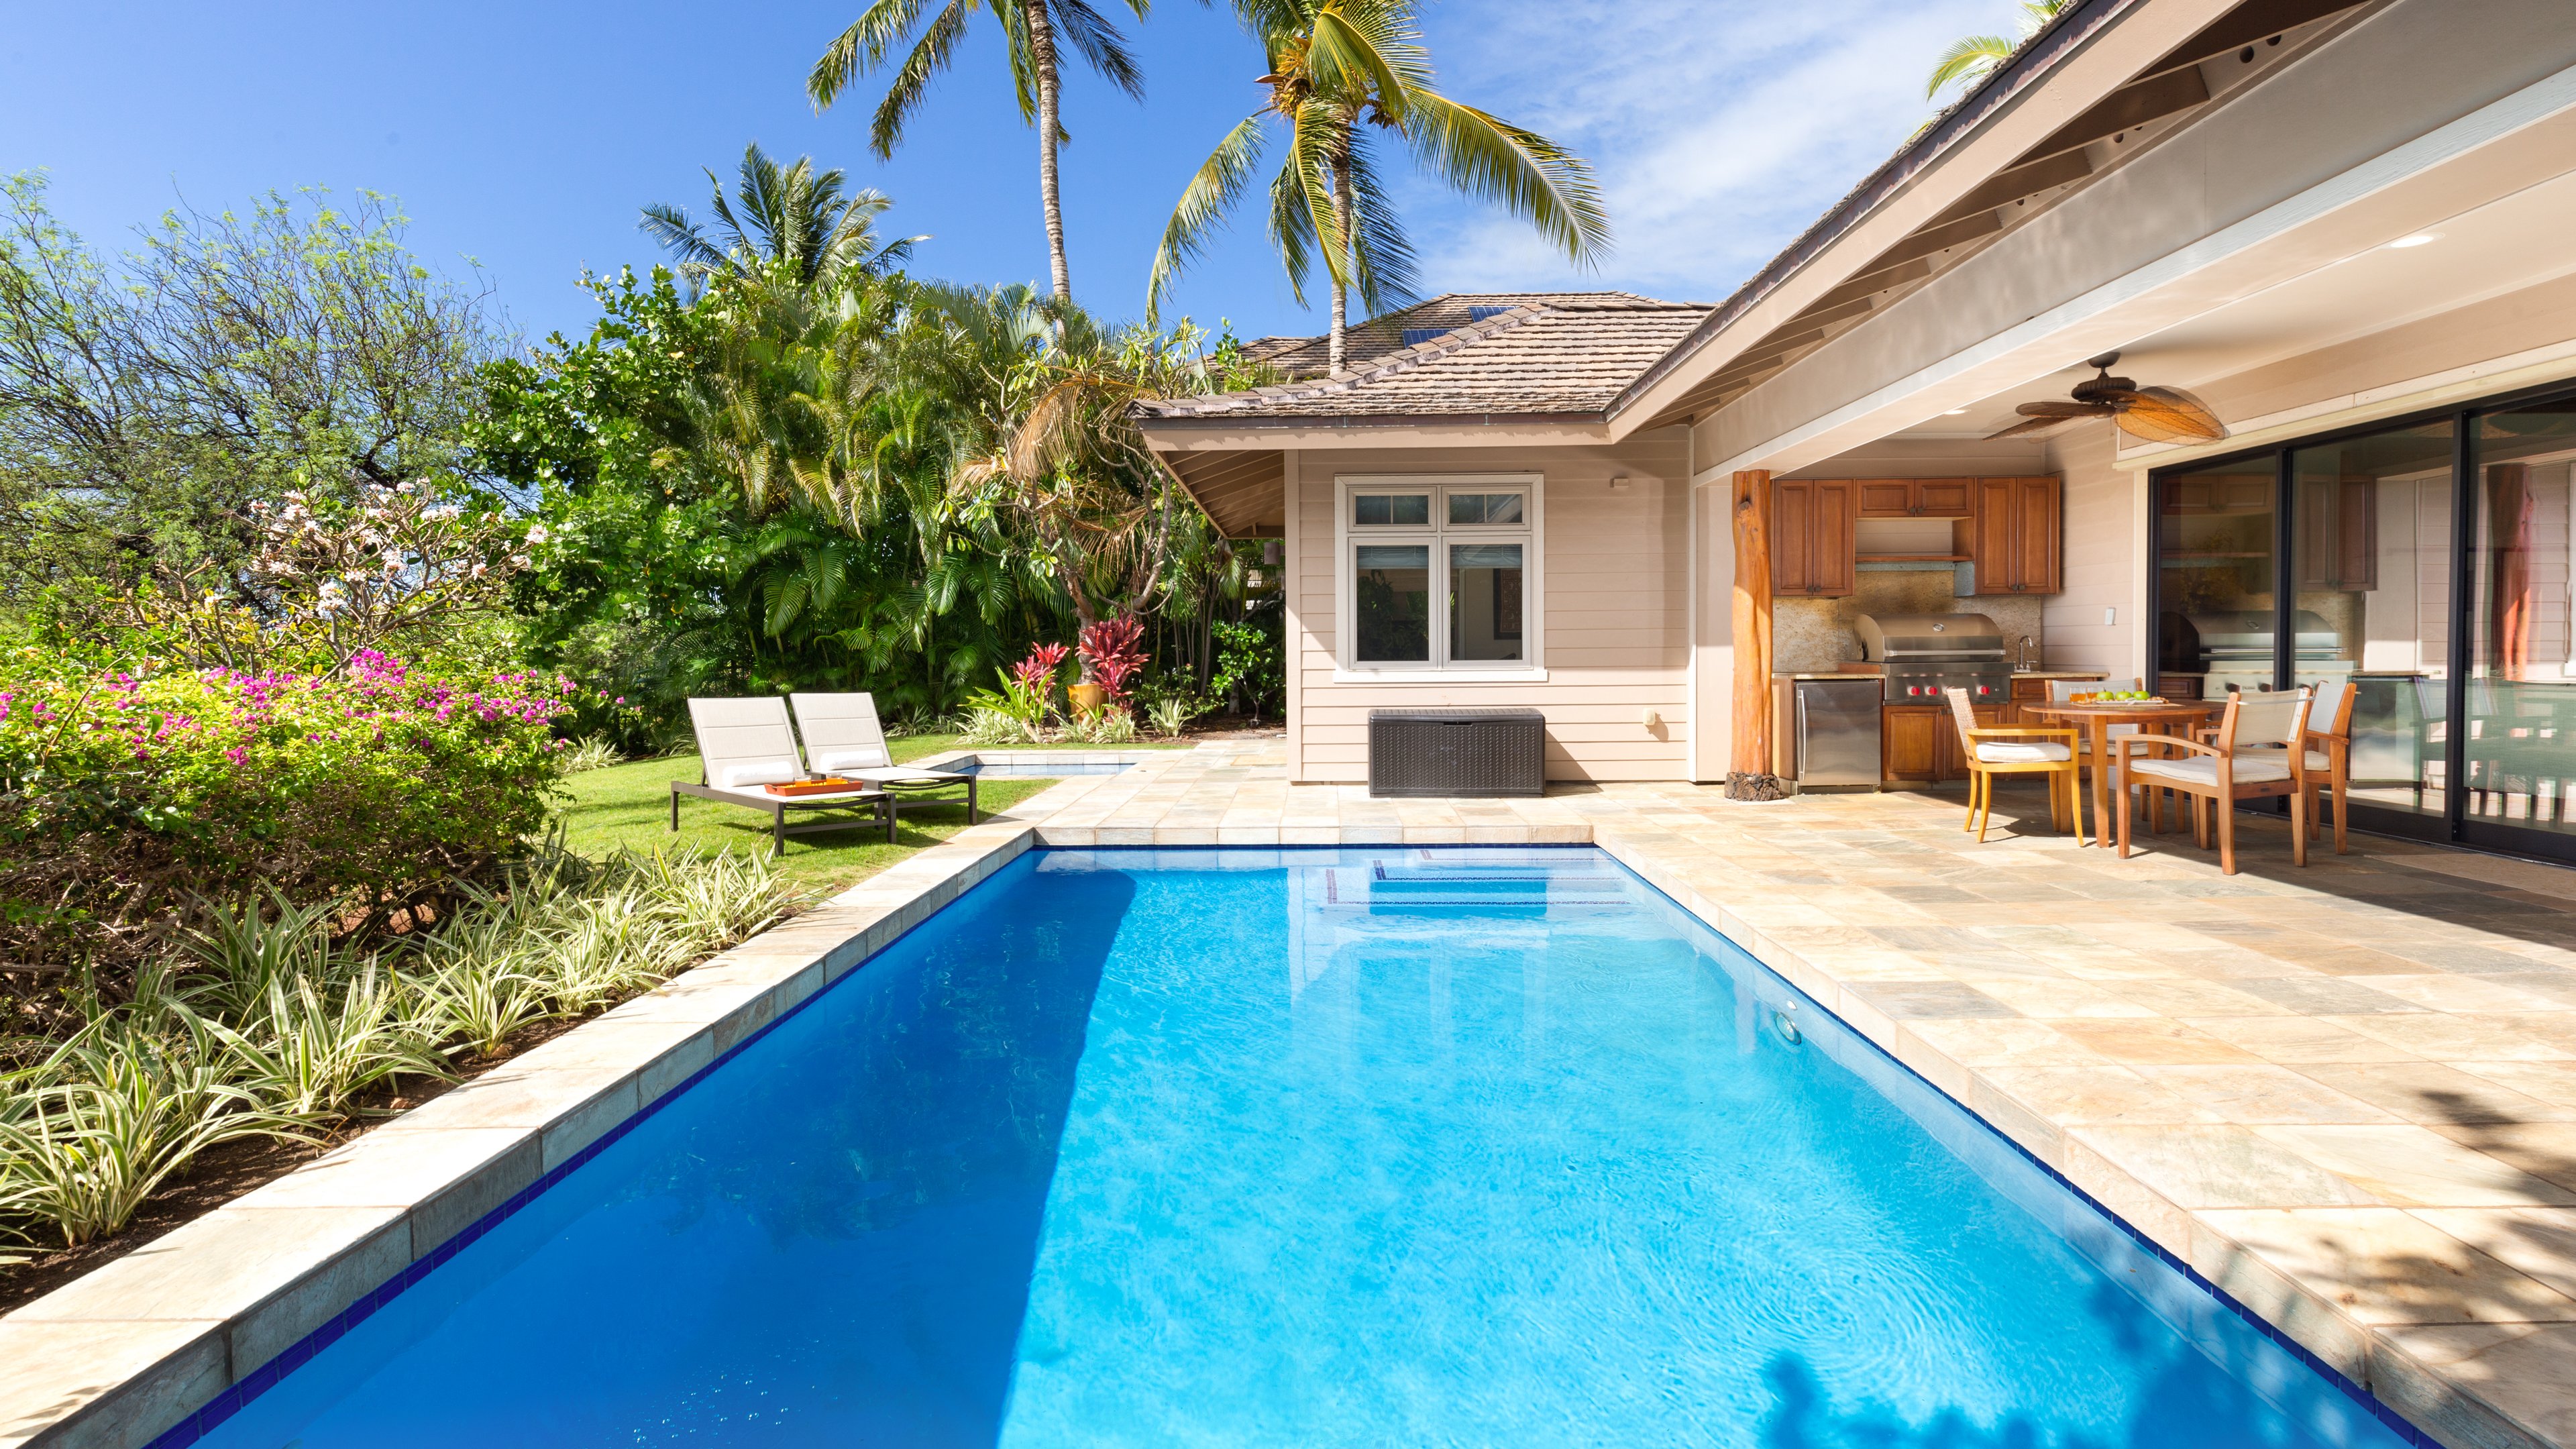 Large backyard with private pool, spa, covered lanai, all surrounded by beautiful tropical gardens.